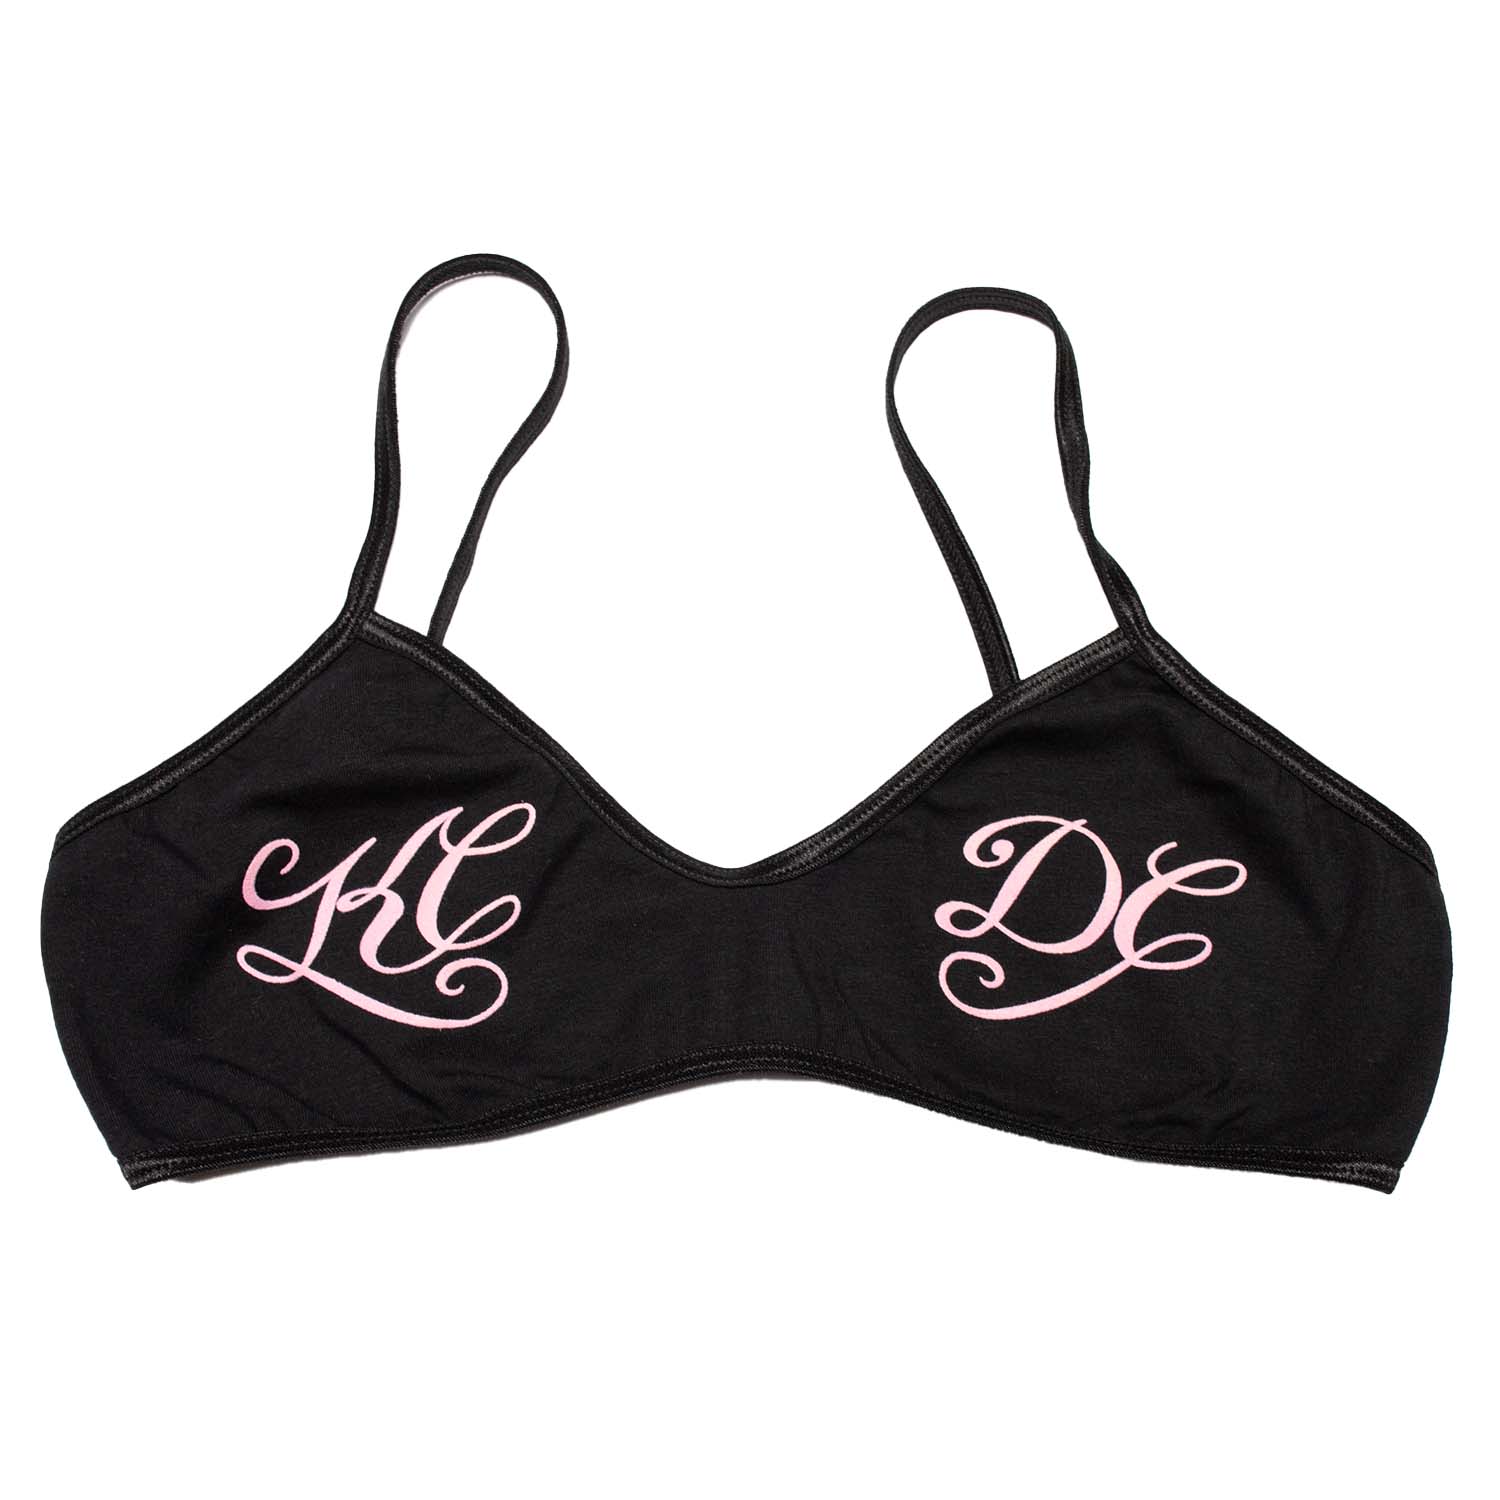 Black spandex spaghetti bralette with pink script printed, reading KC on the left breast, DC on the right breast. Pair with the KCDC bikini panty for the full set.